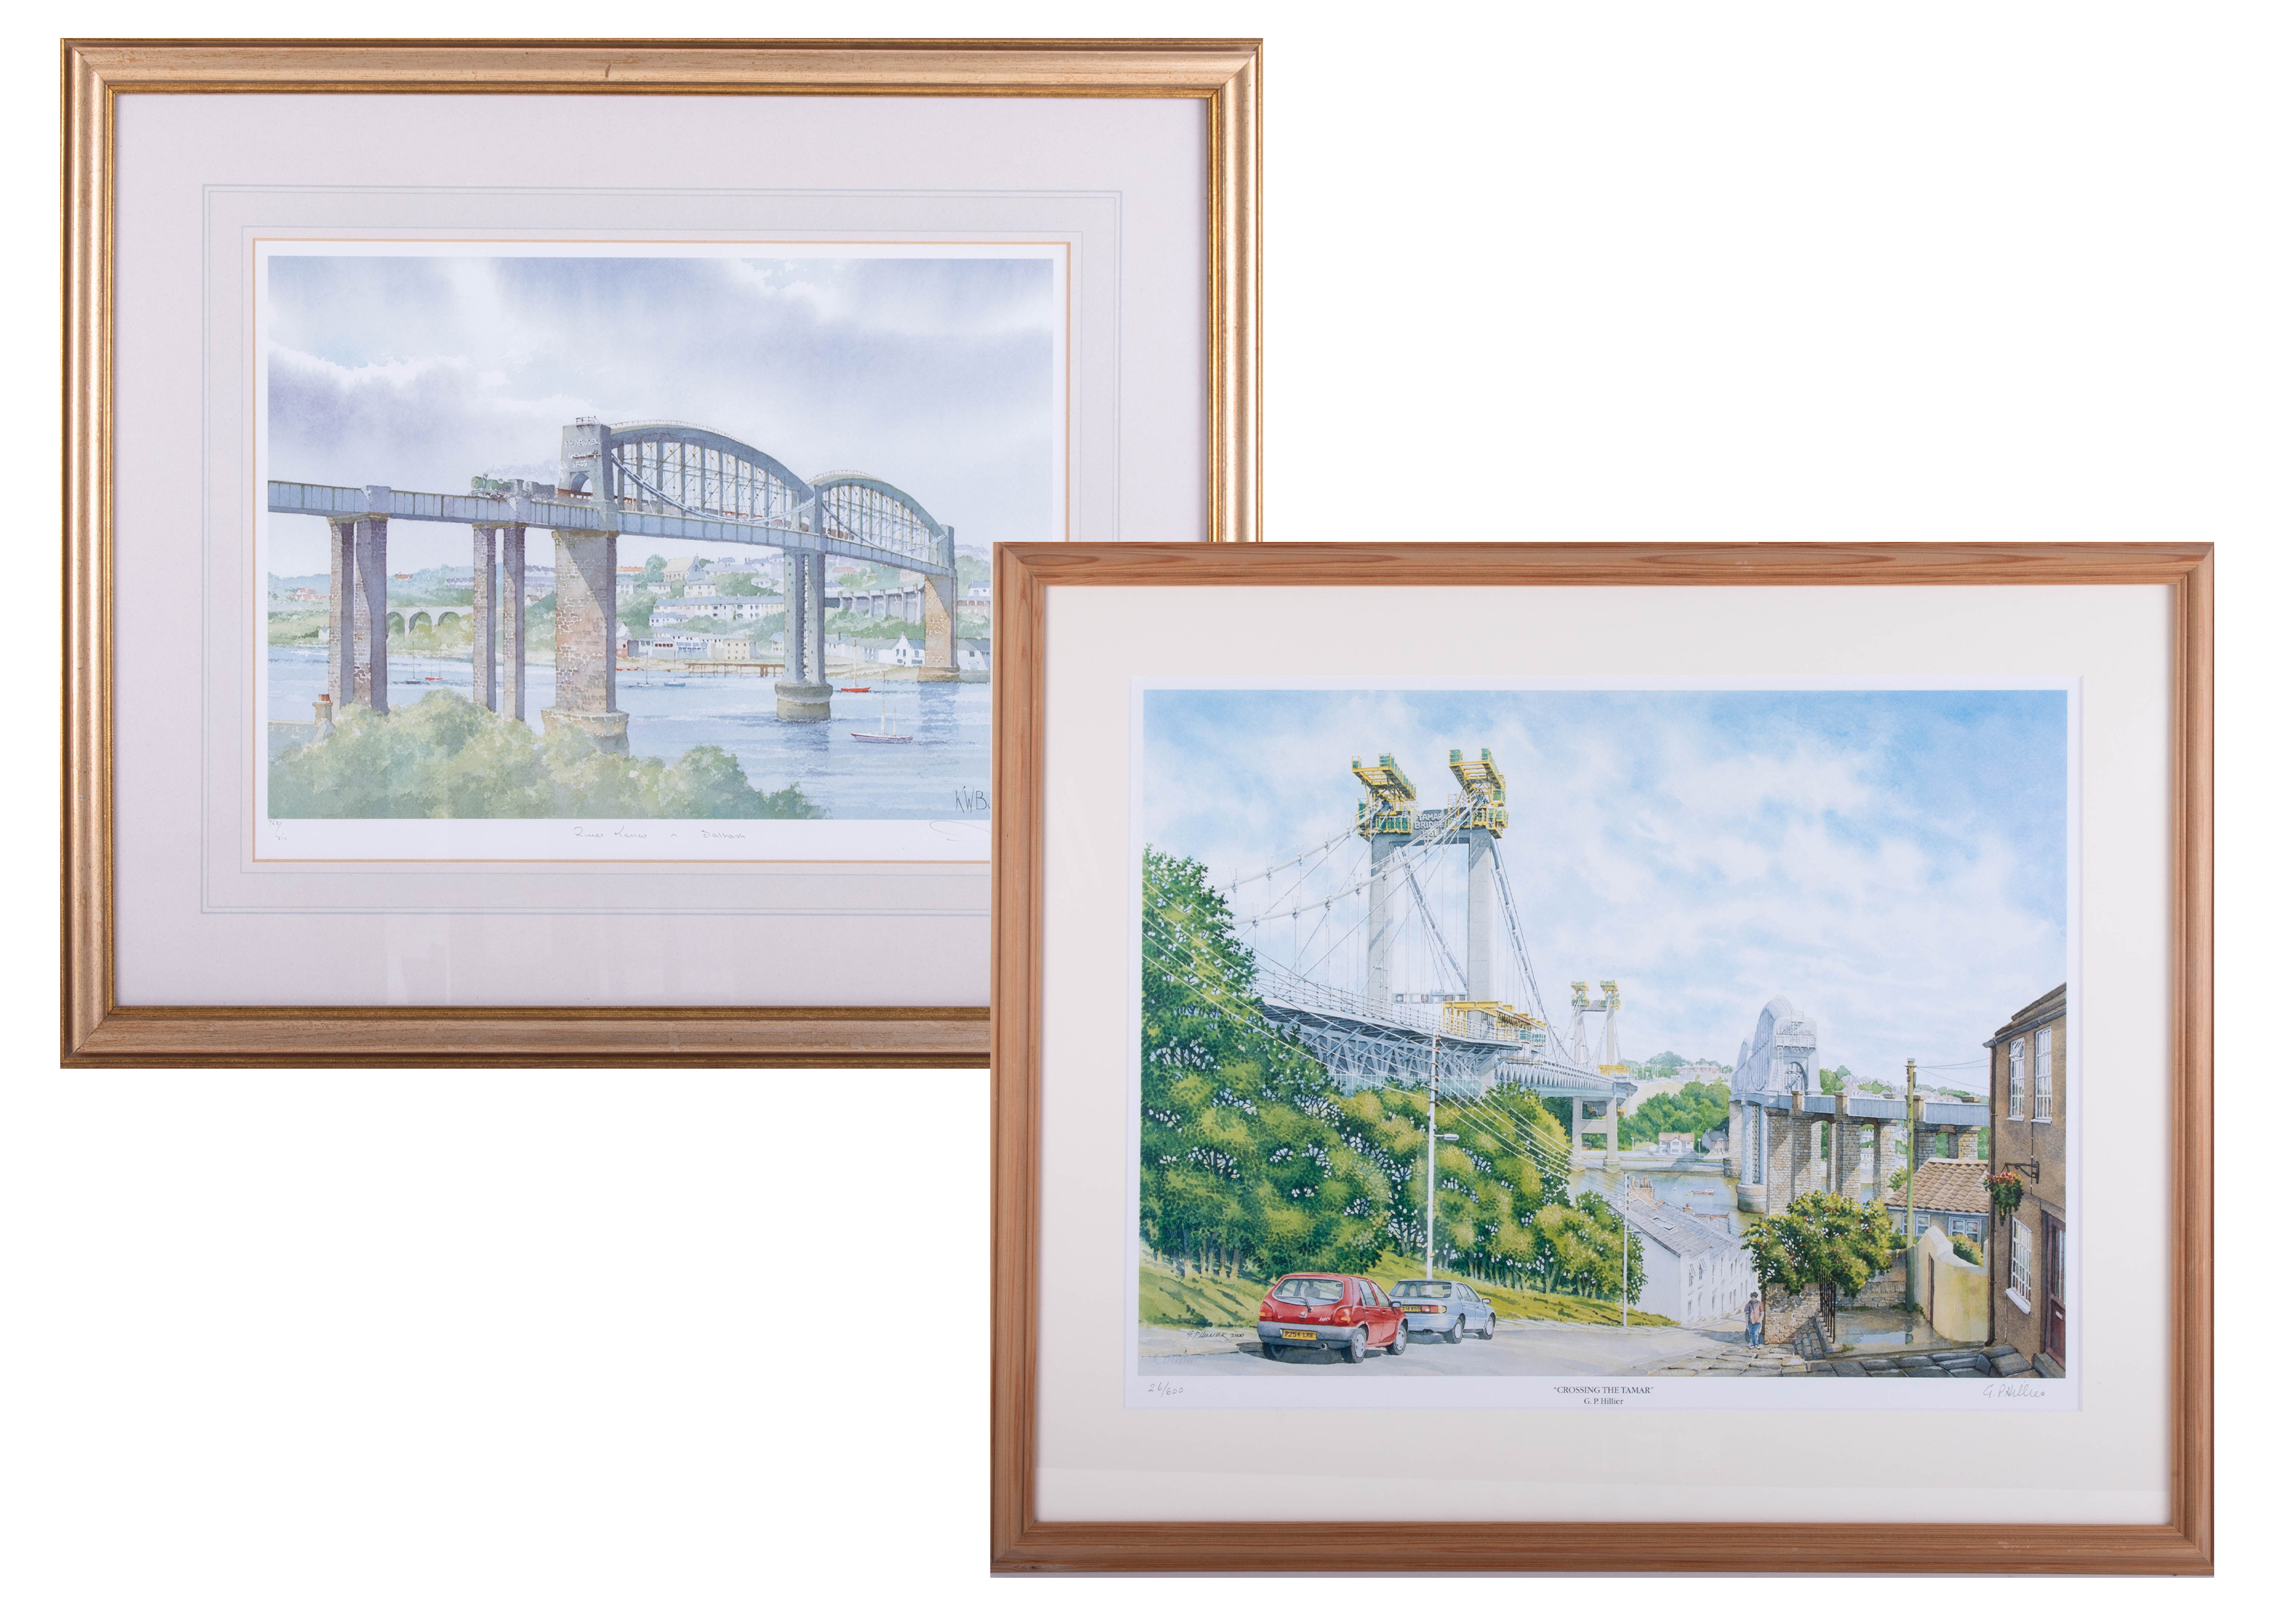 K.W.Burton, signed print River Tamar, together with G. Hillier Crossing the Tamar, limited